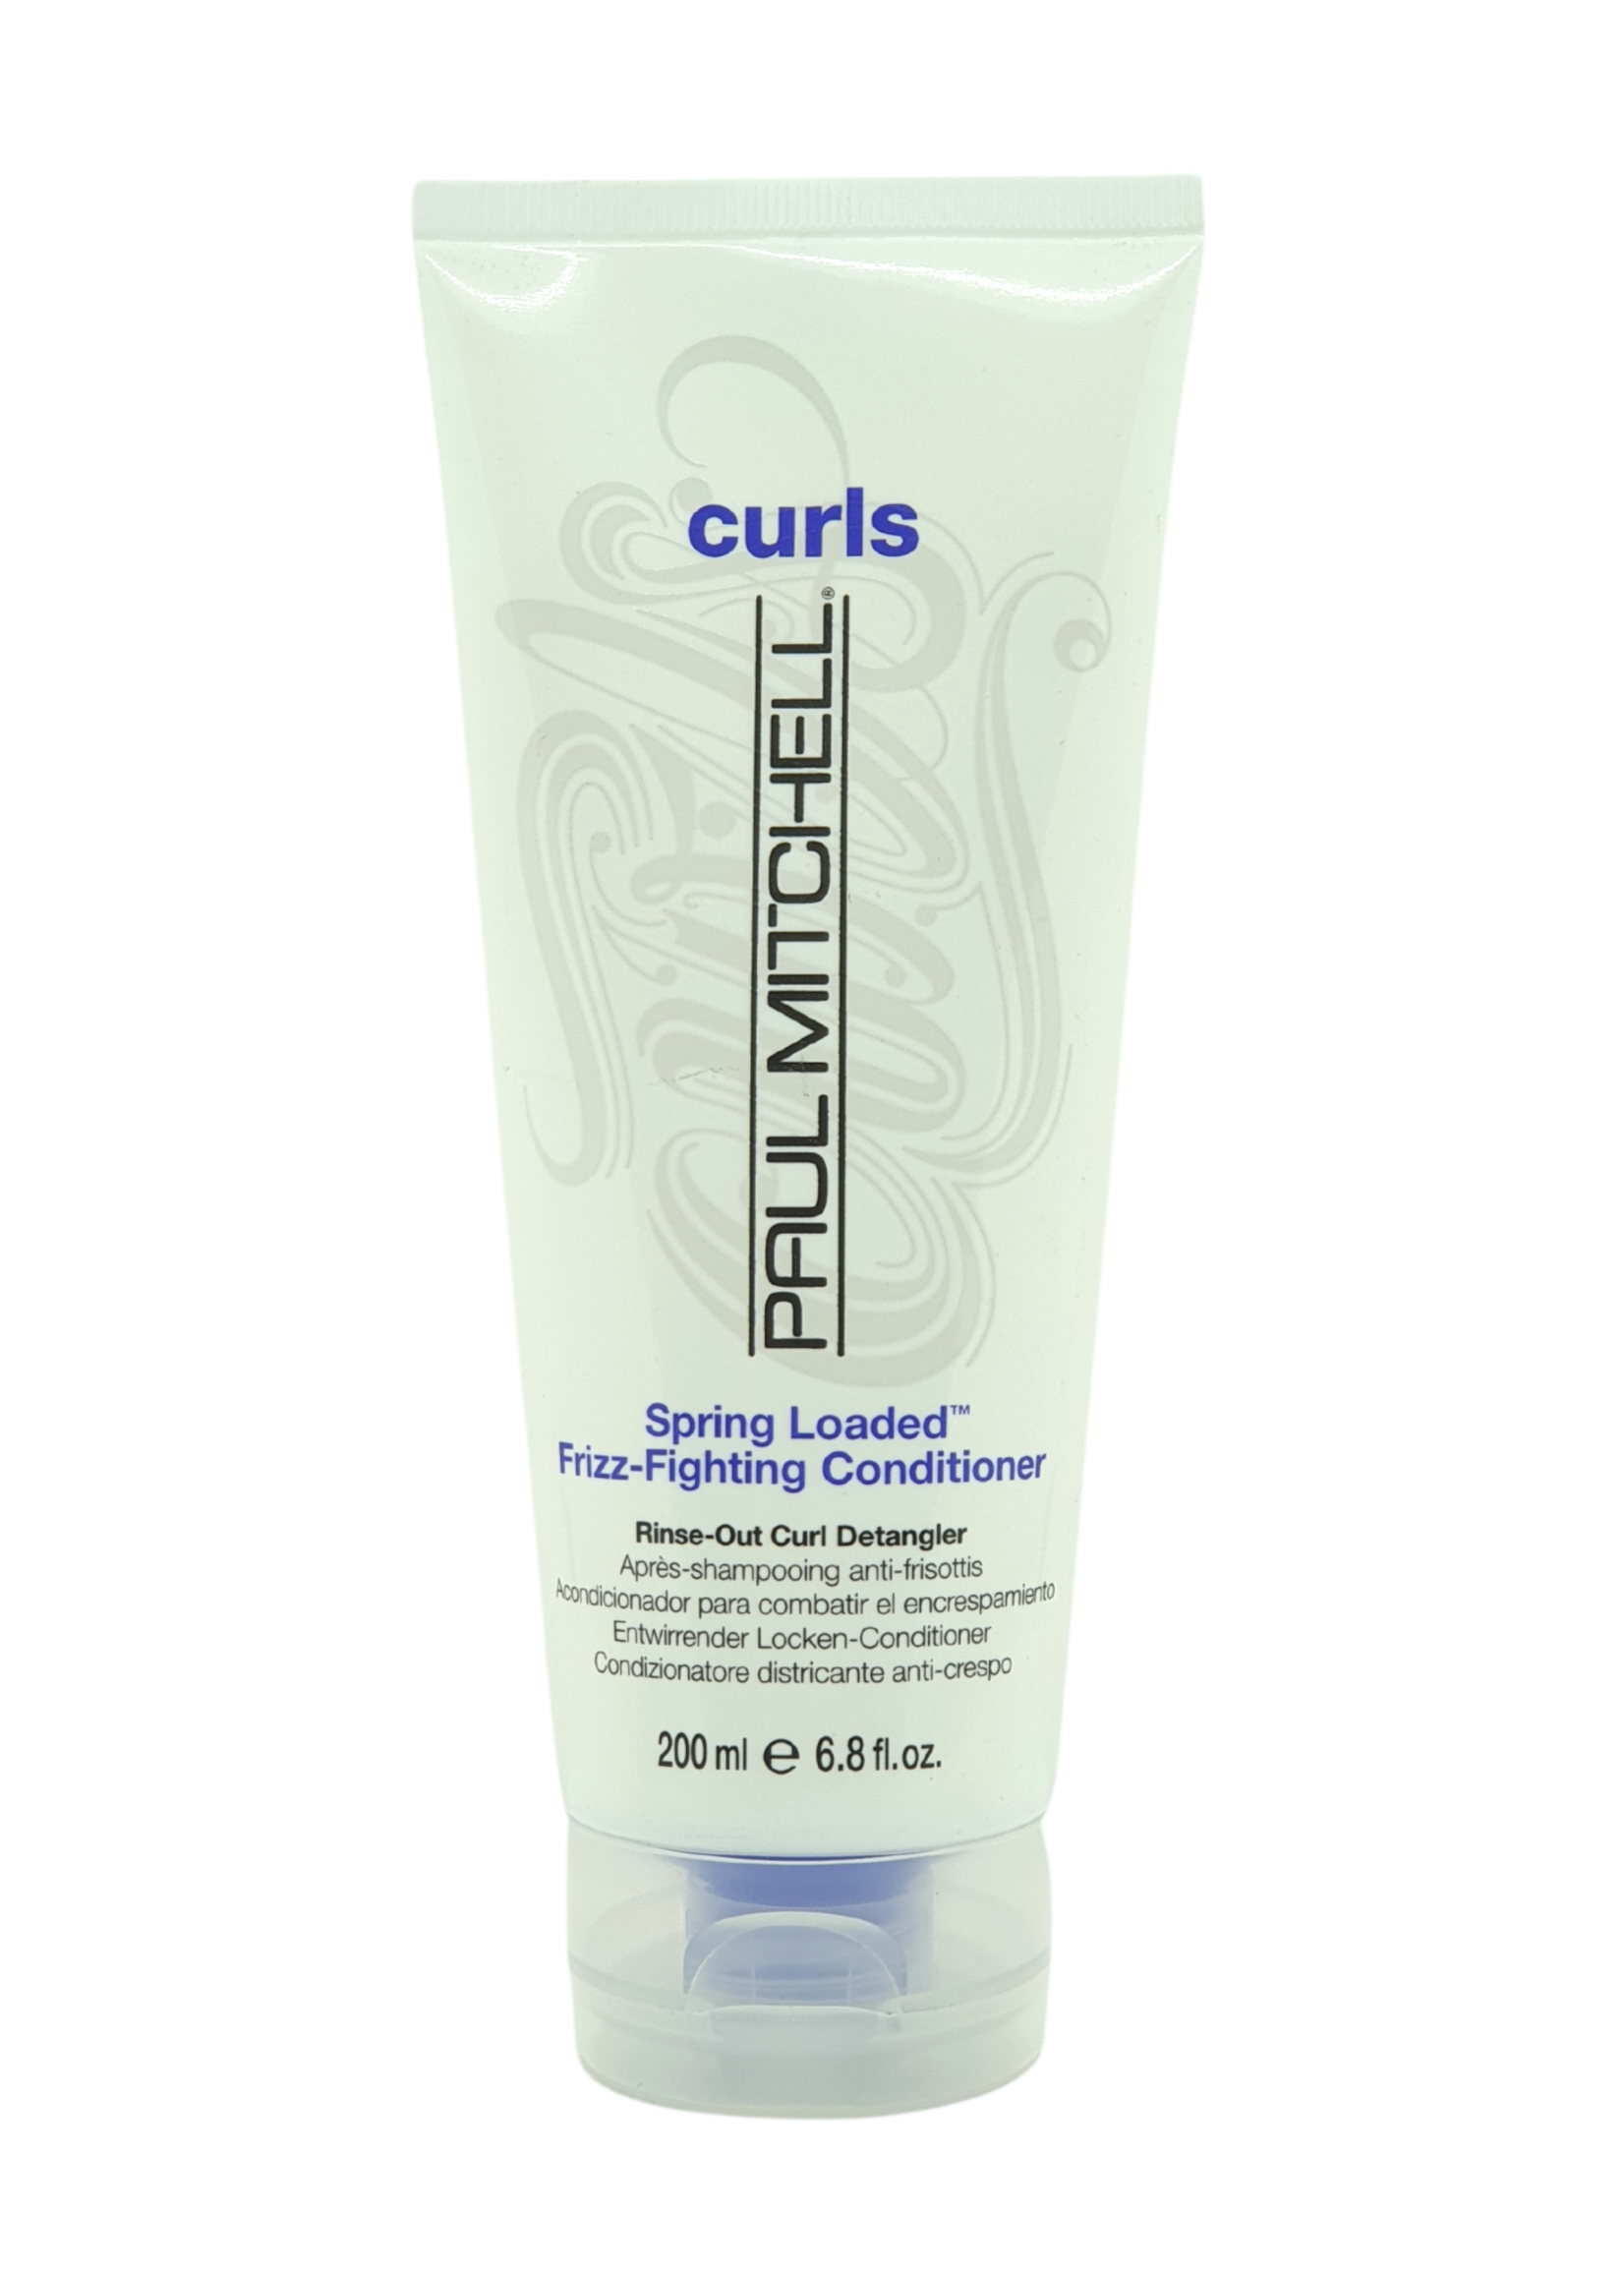 Paul Mitchell Paul Mitchell Curls Spring Loaded Frizz-Fighting Conditioner 200ml